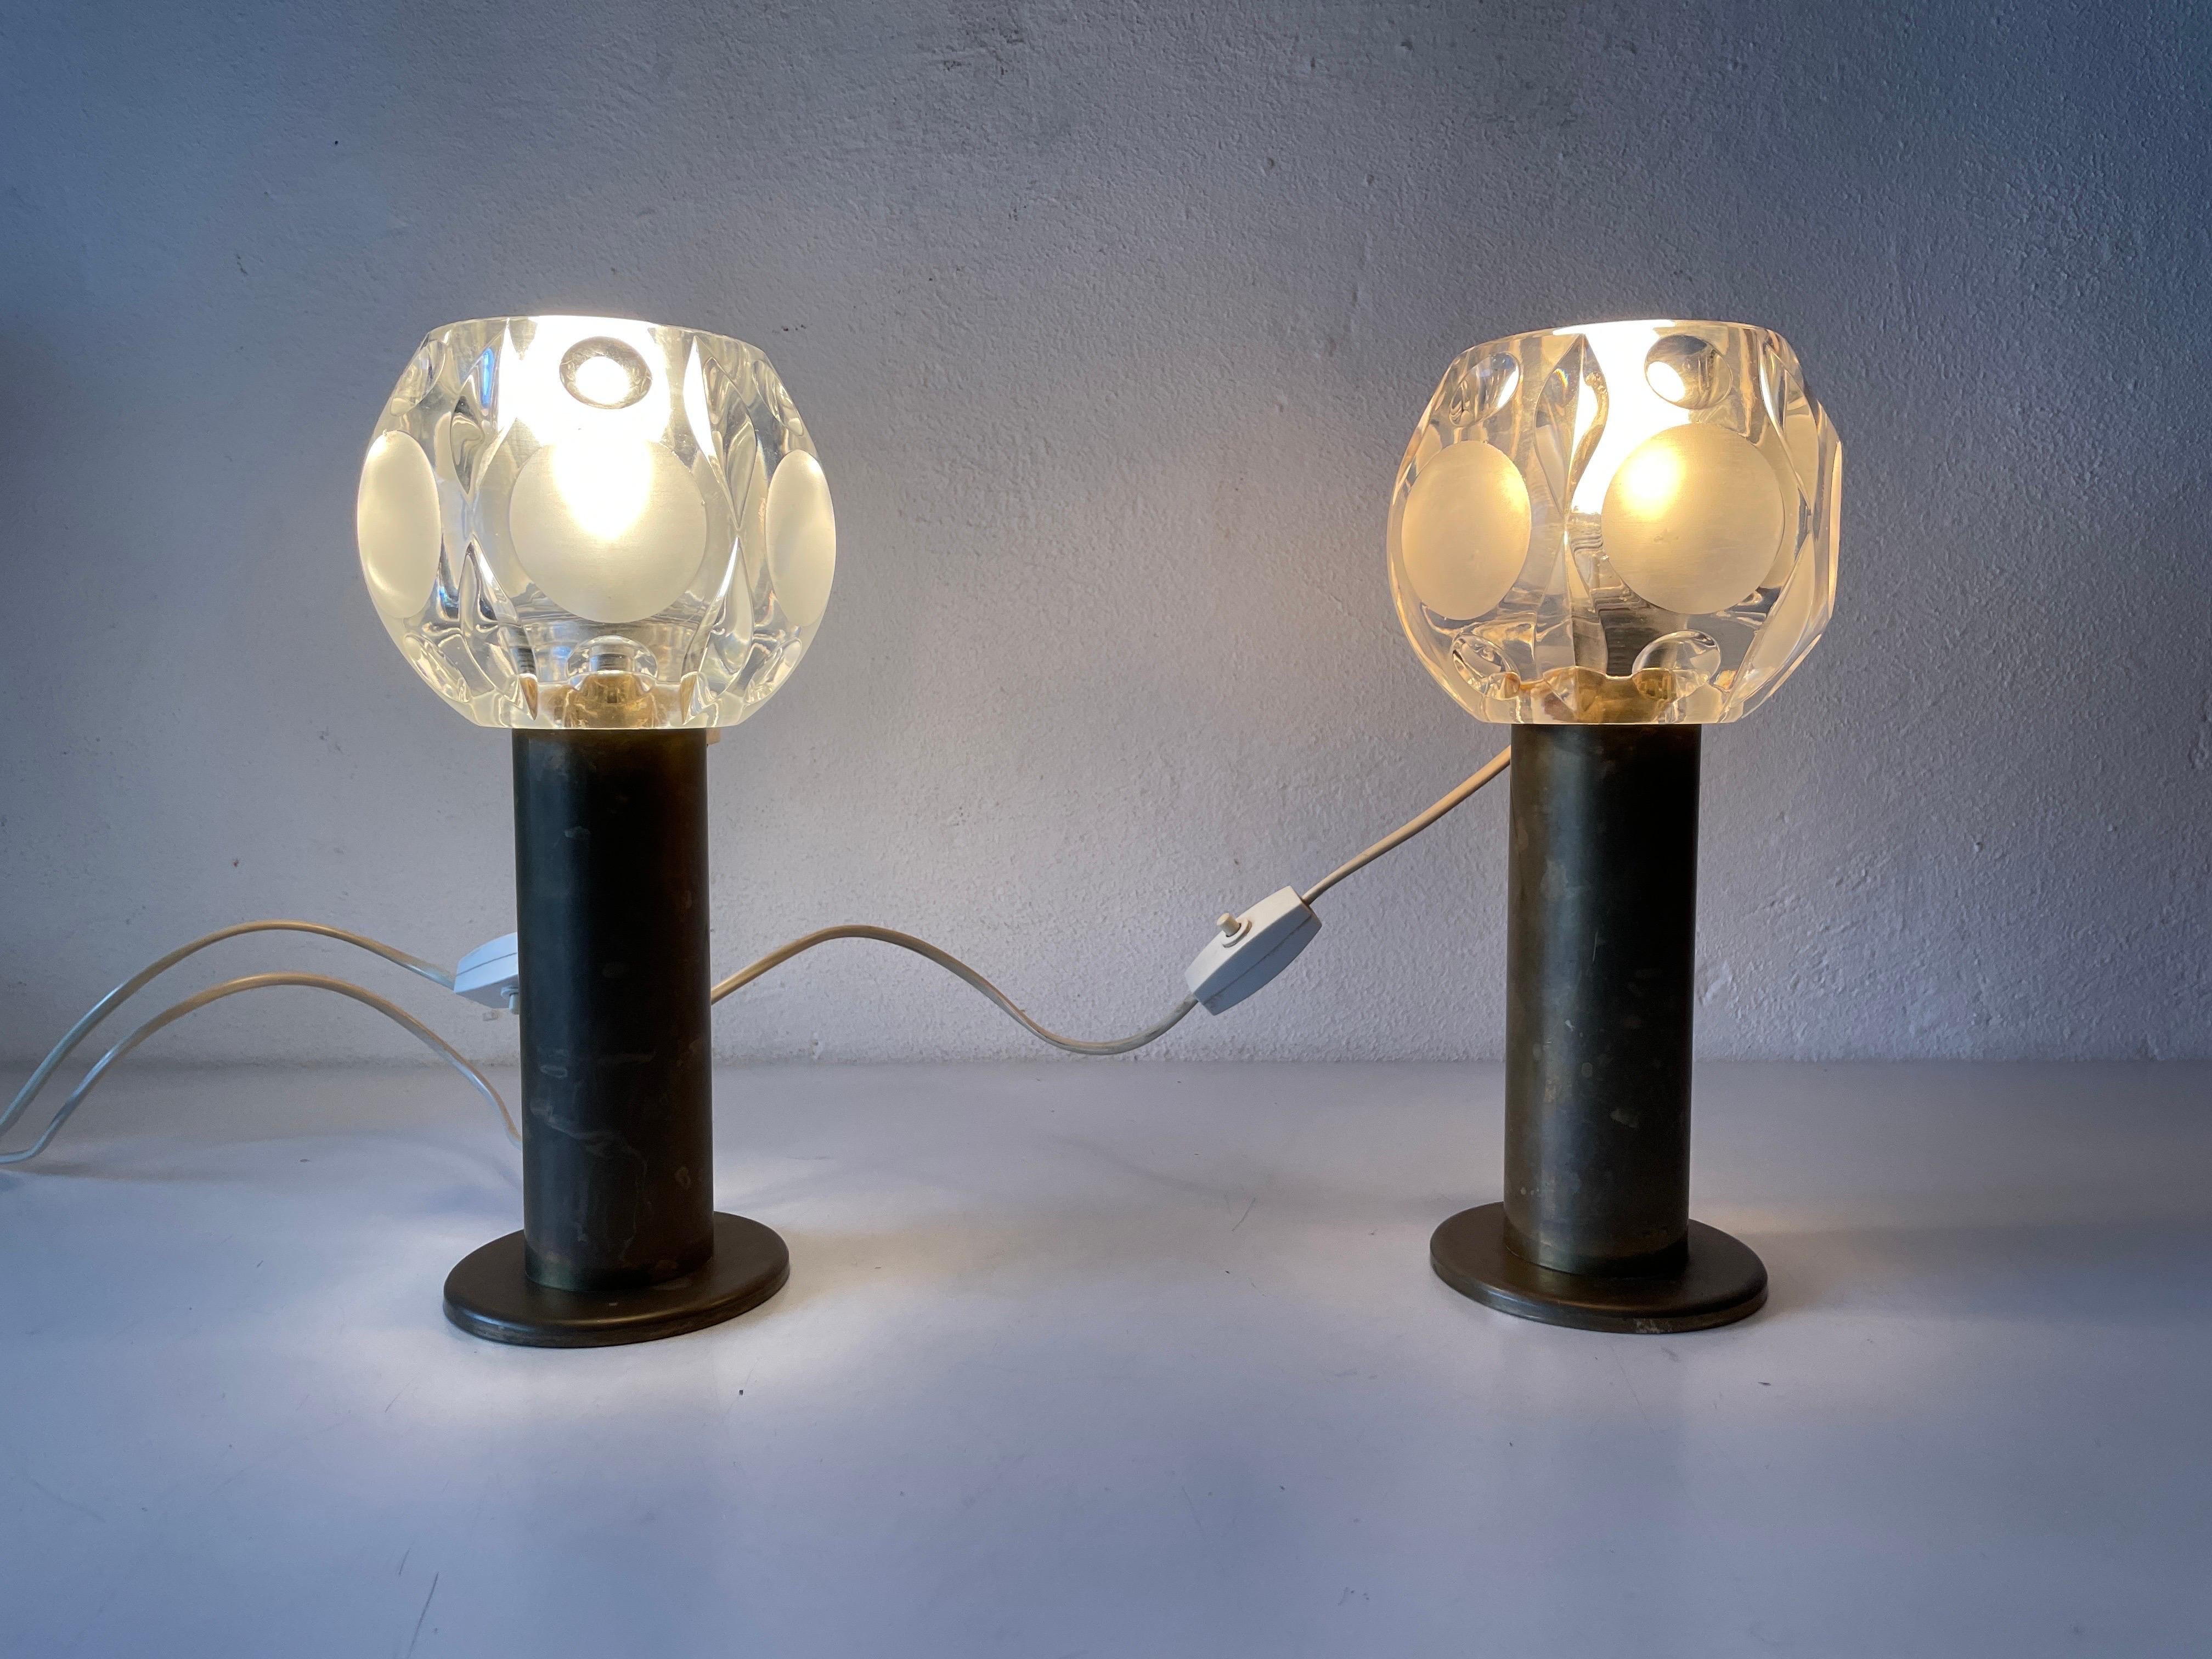 Heavy Glass and Brass Body Pair of Table Lamps by Peill Putzler, 1960s, Germany For Sale 2